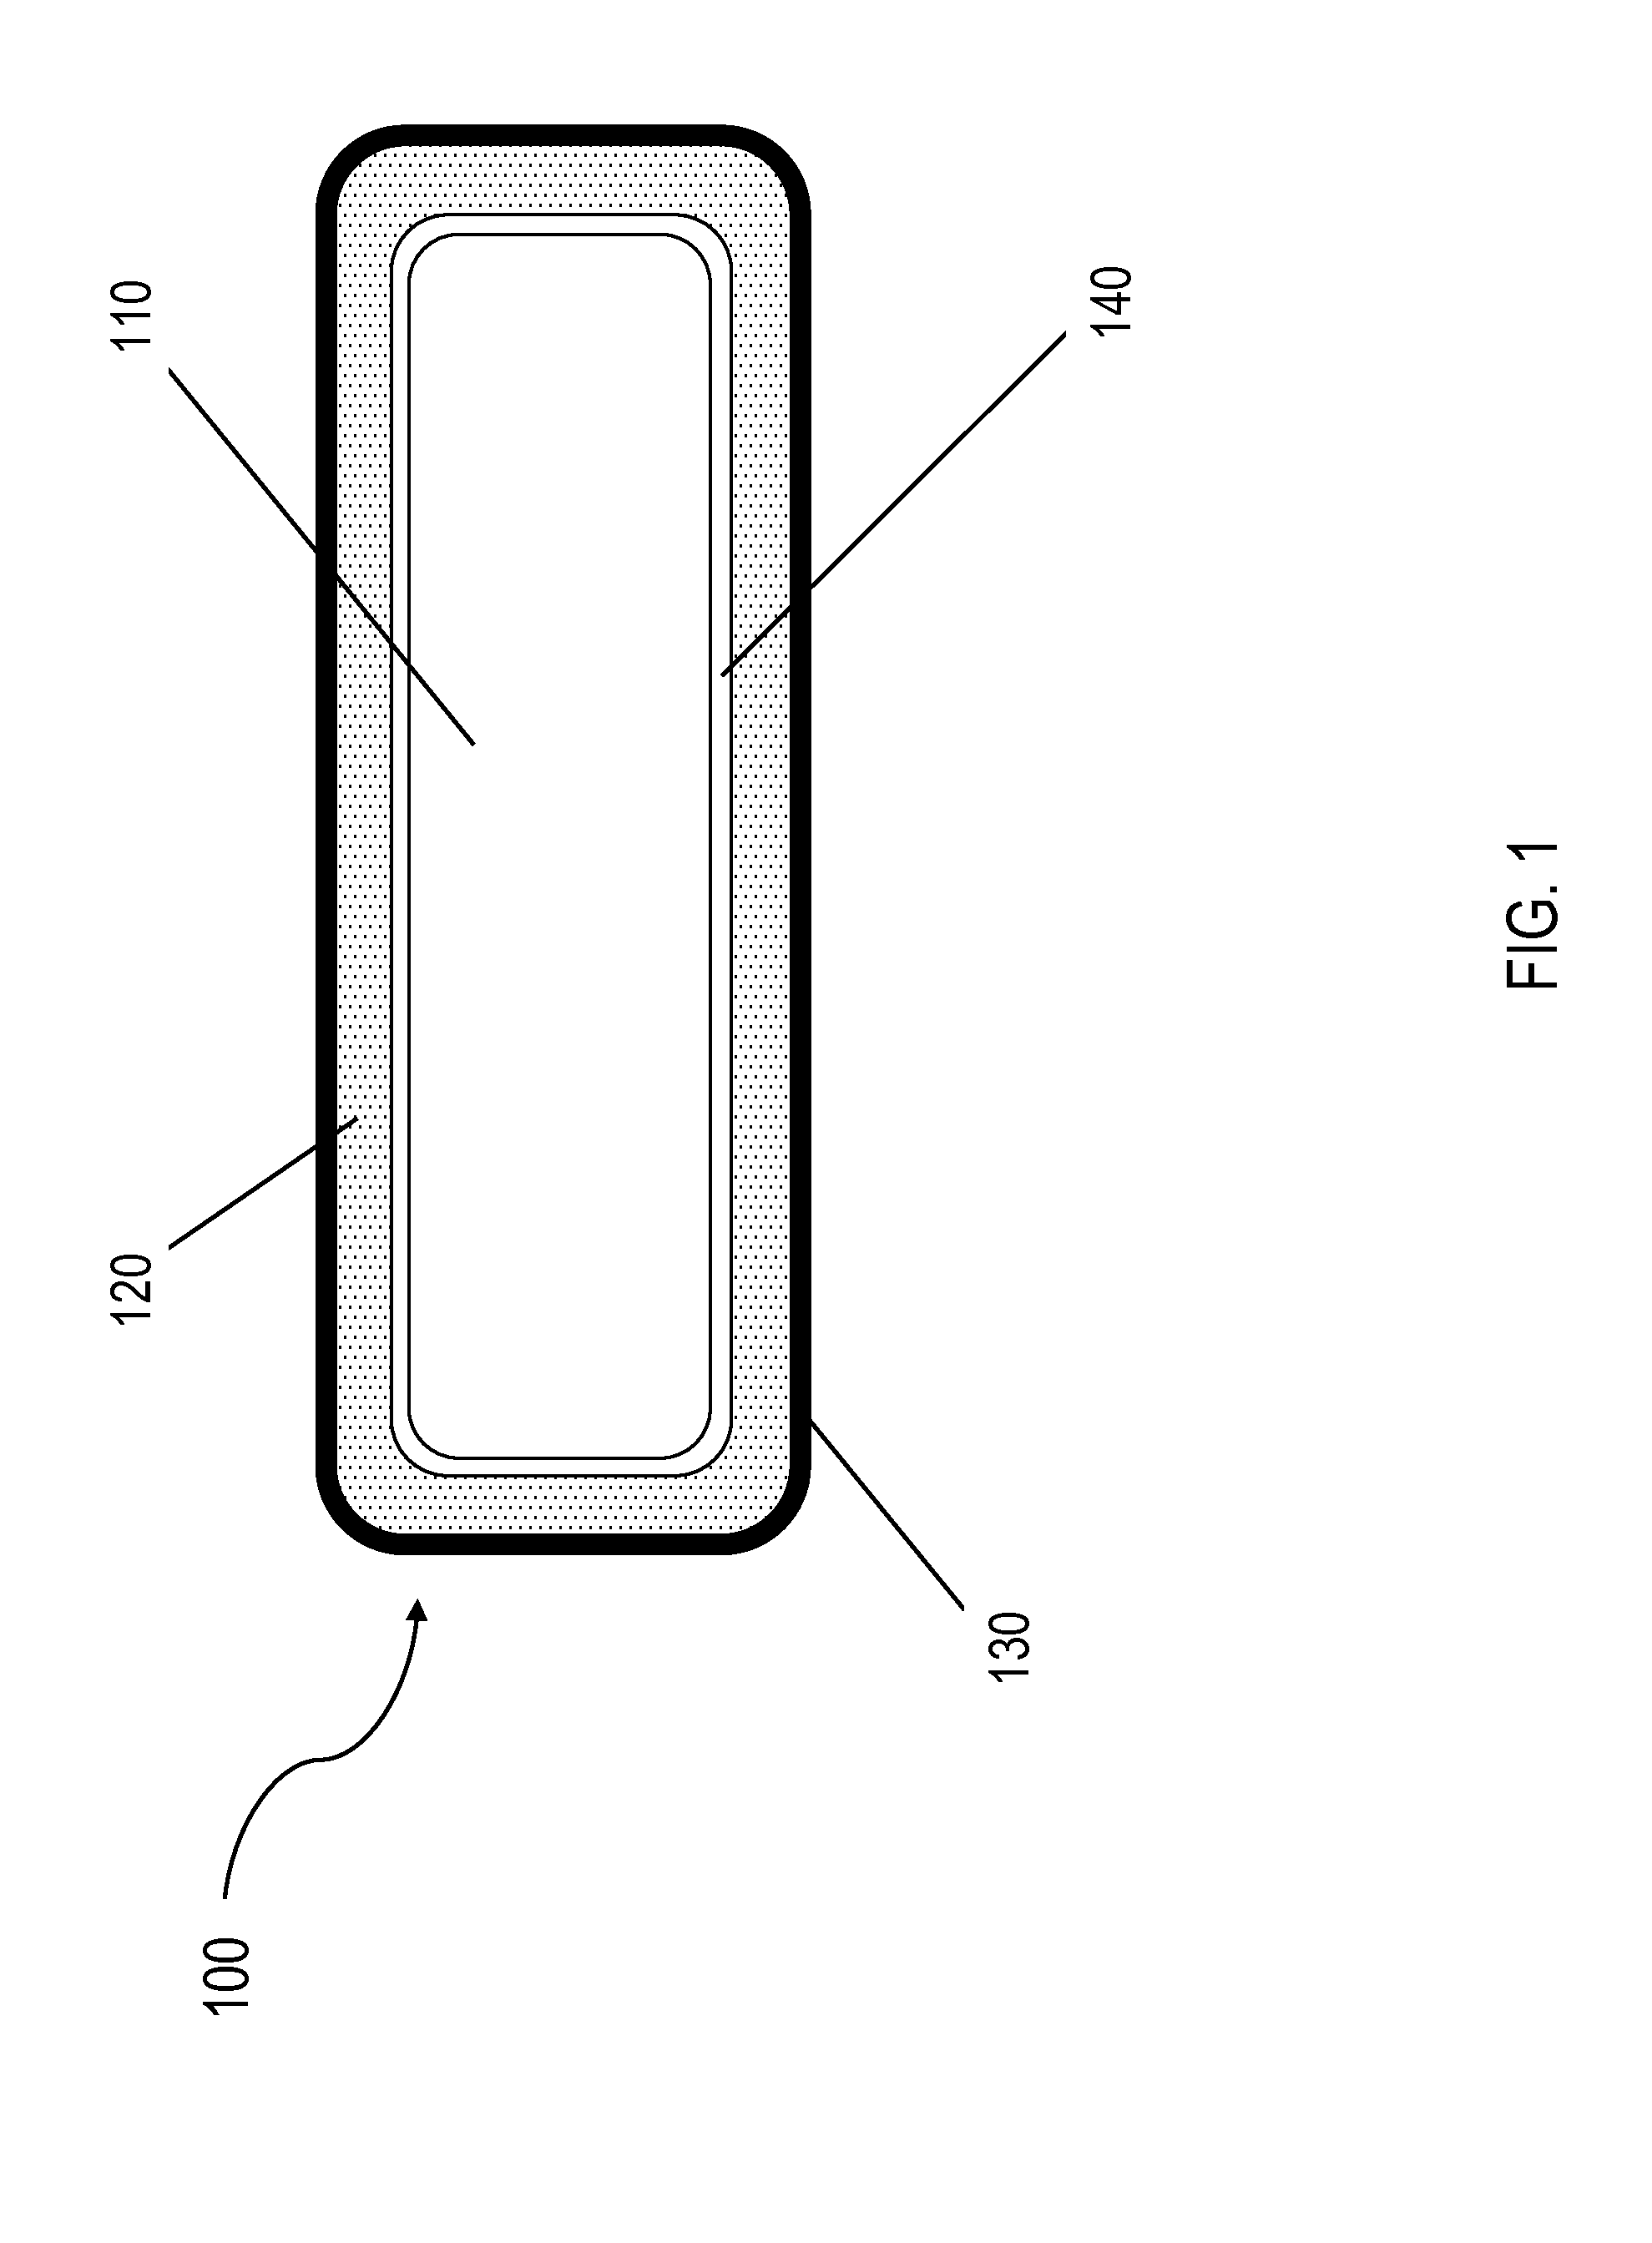 Thermally-armored radio-frequency identification device and method of producing same